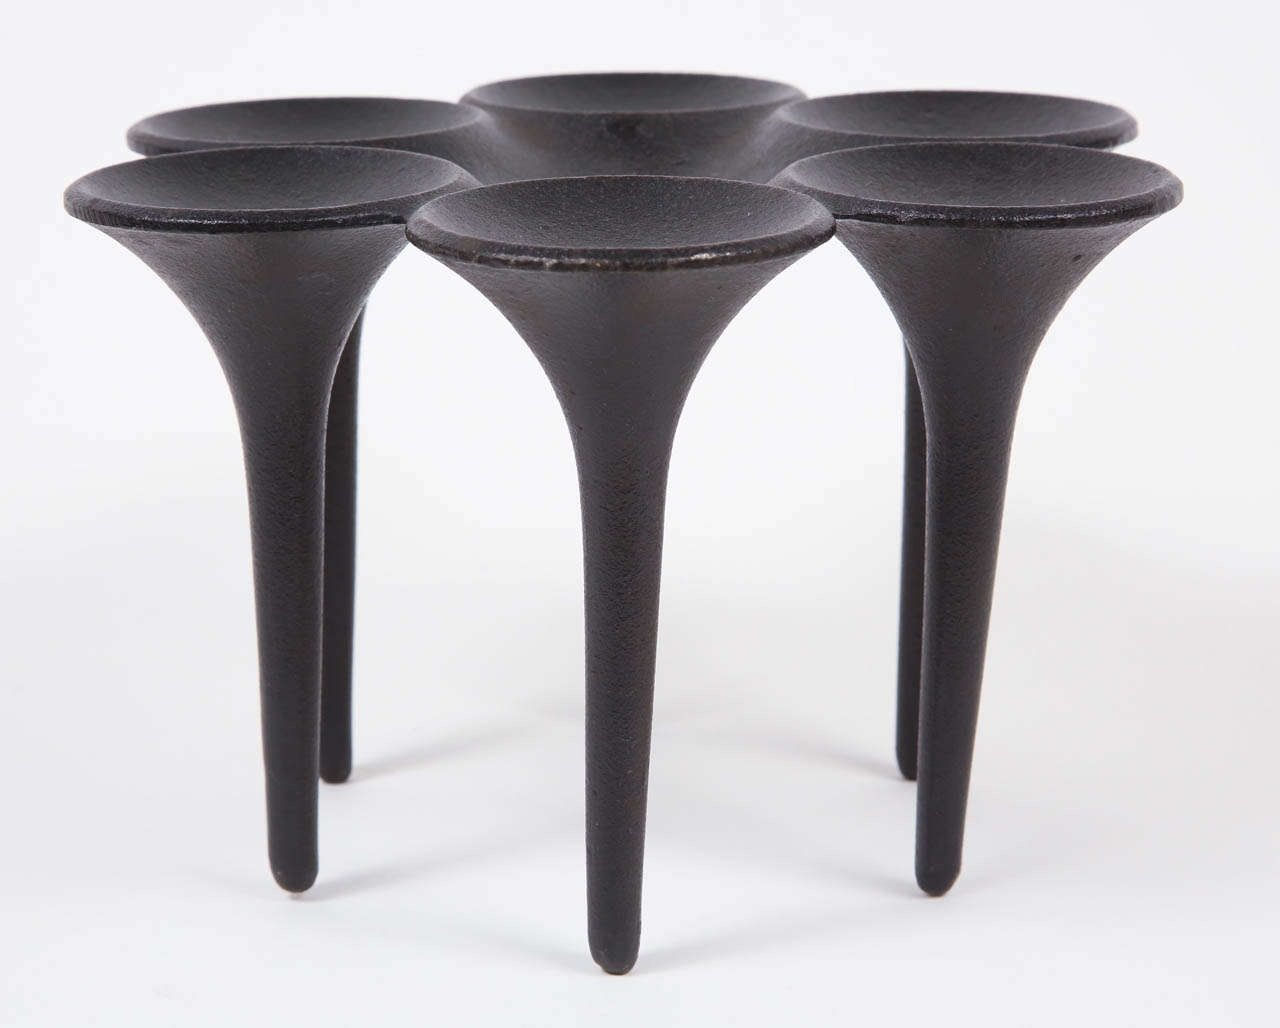 A beautifully rendered cast iron candleholder, for 3/4